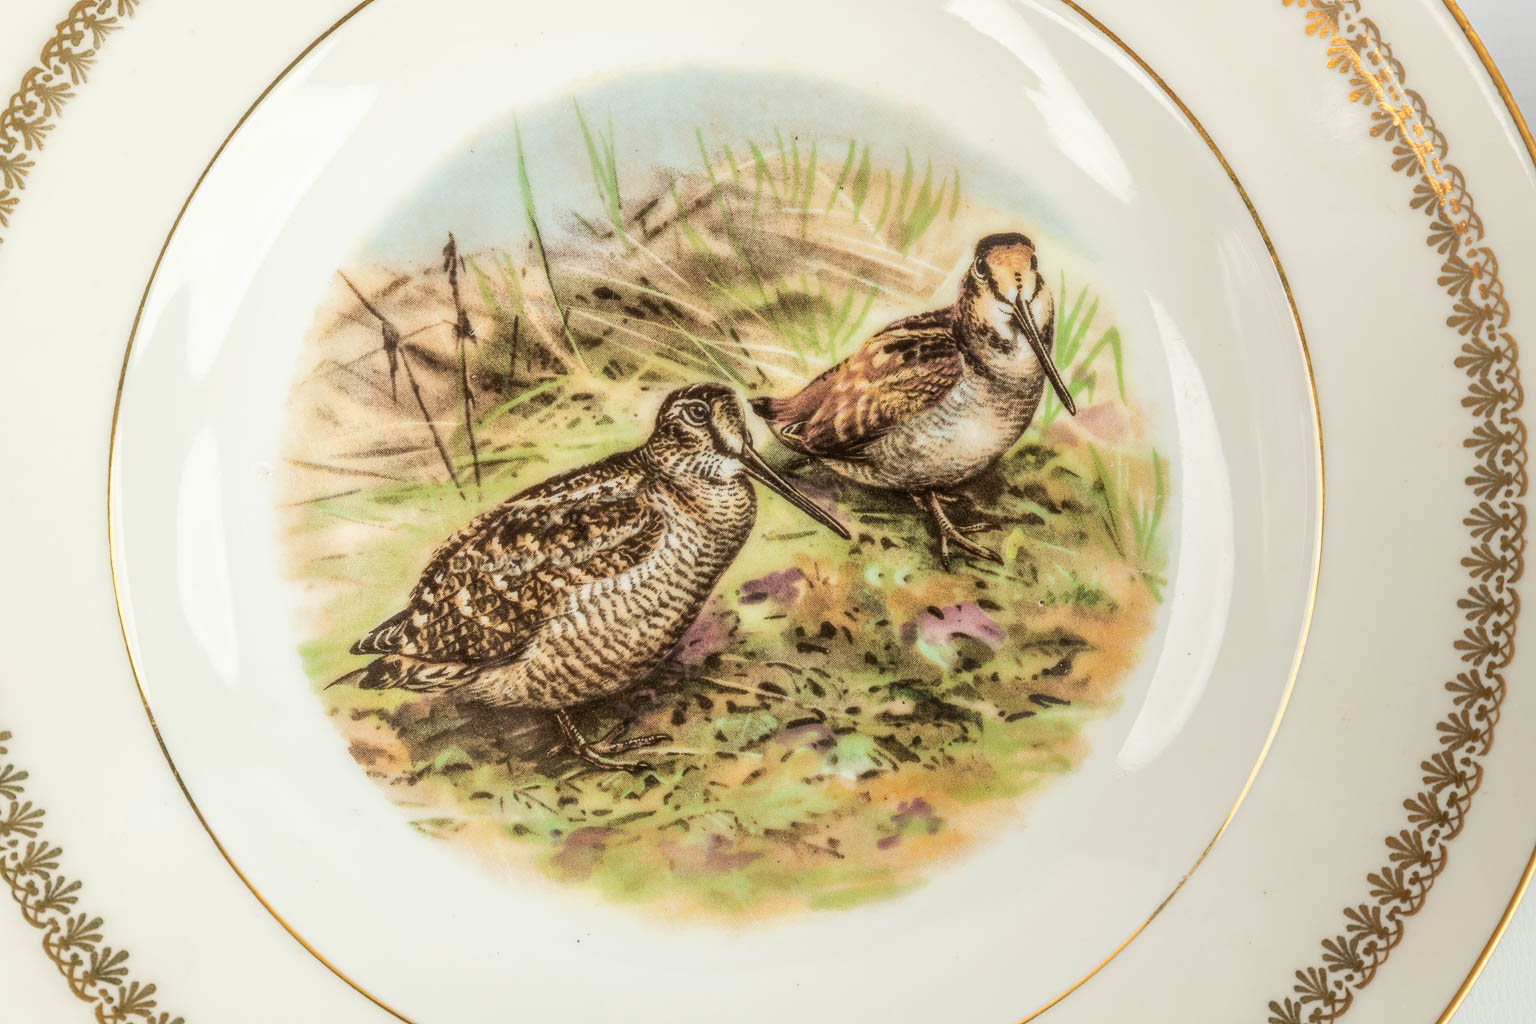 A 30-piece dinner service decorated with wildlife, made of porcelain and marked Porcelain de Limoges. (H:16,5cm)